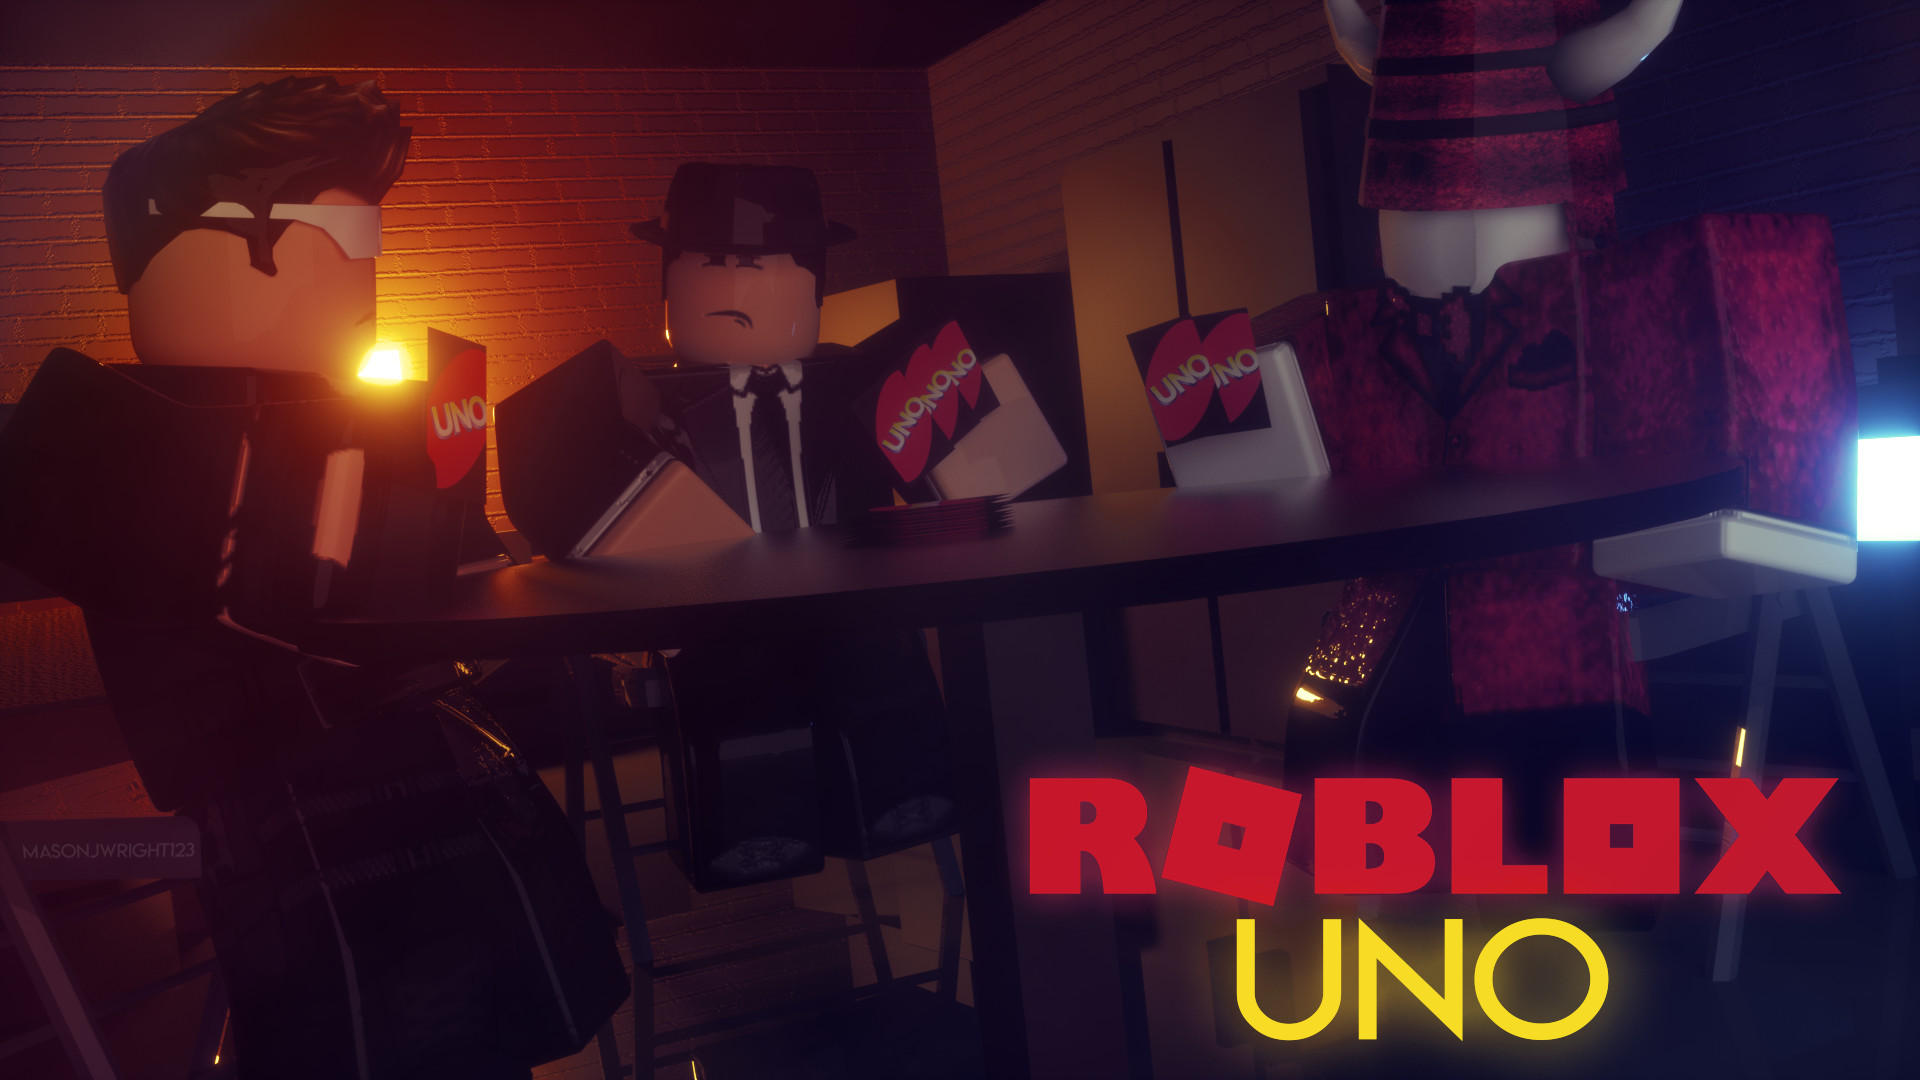 uno on roblox